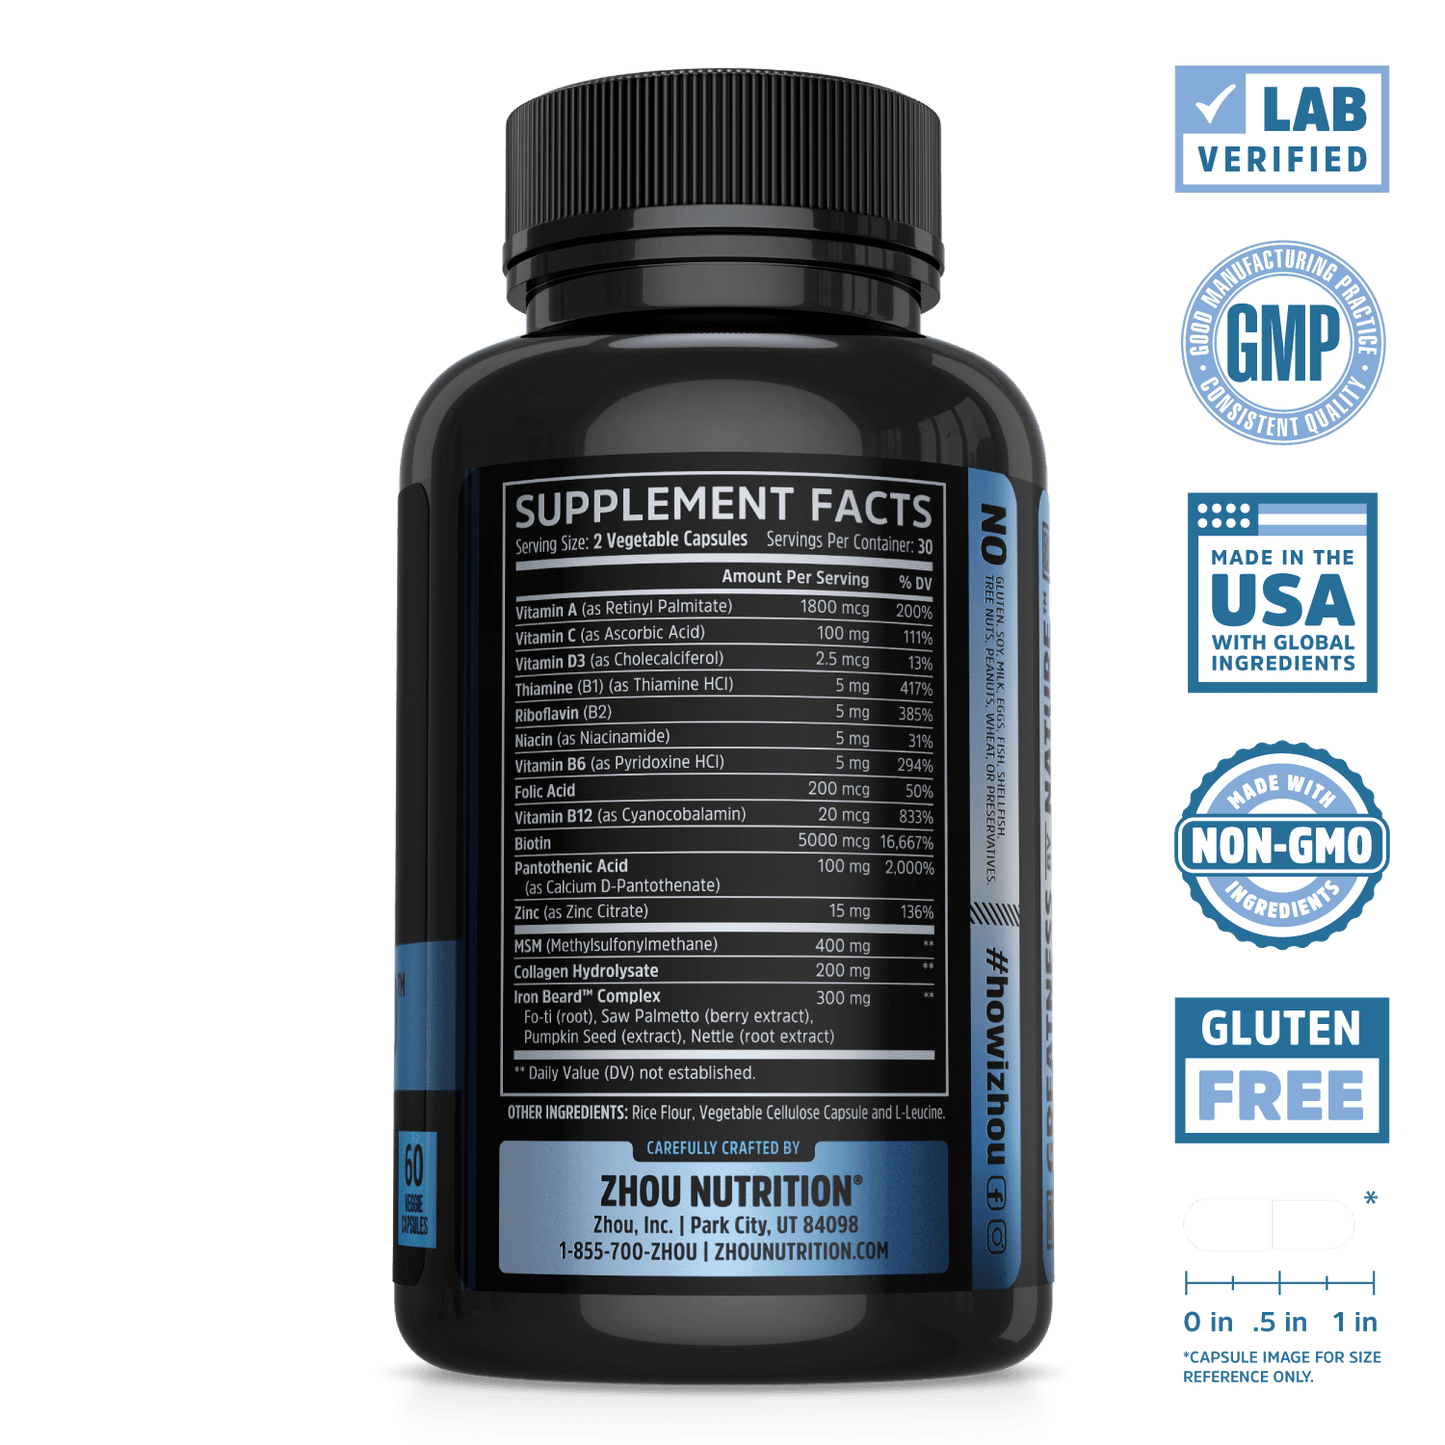 Iron Beard Supplement from Zhou Nutrition. Lab verified, good manufacturing practice, made in the USA with global ingredients, made with non-GMO ingredients, gluten free